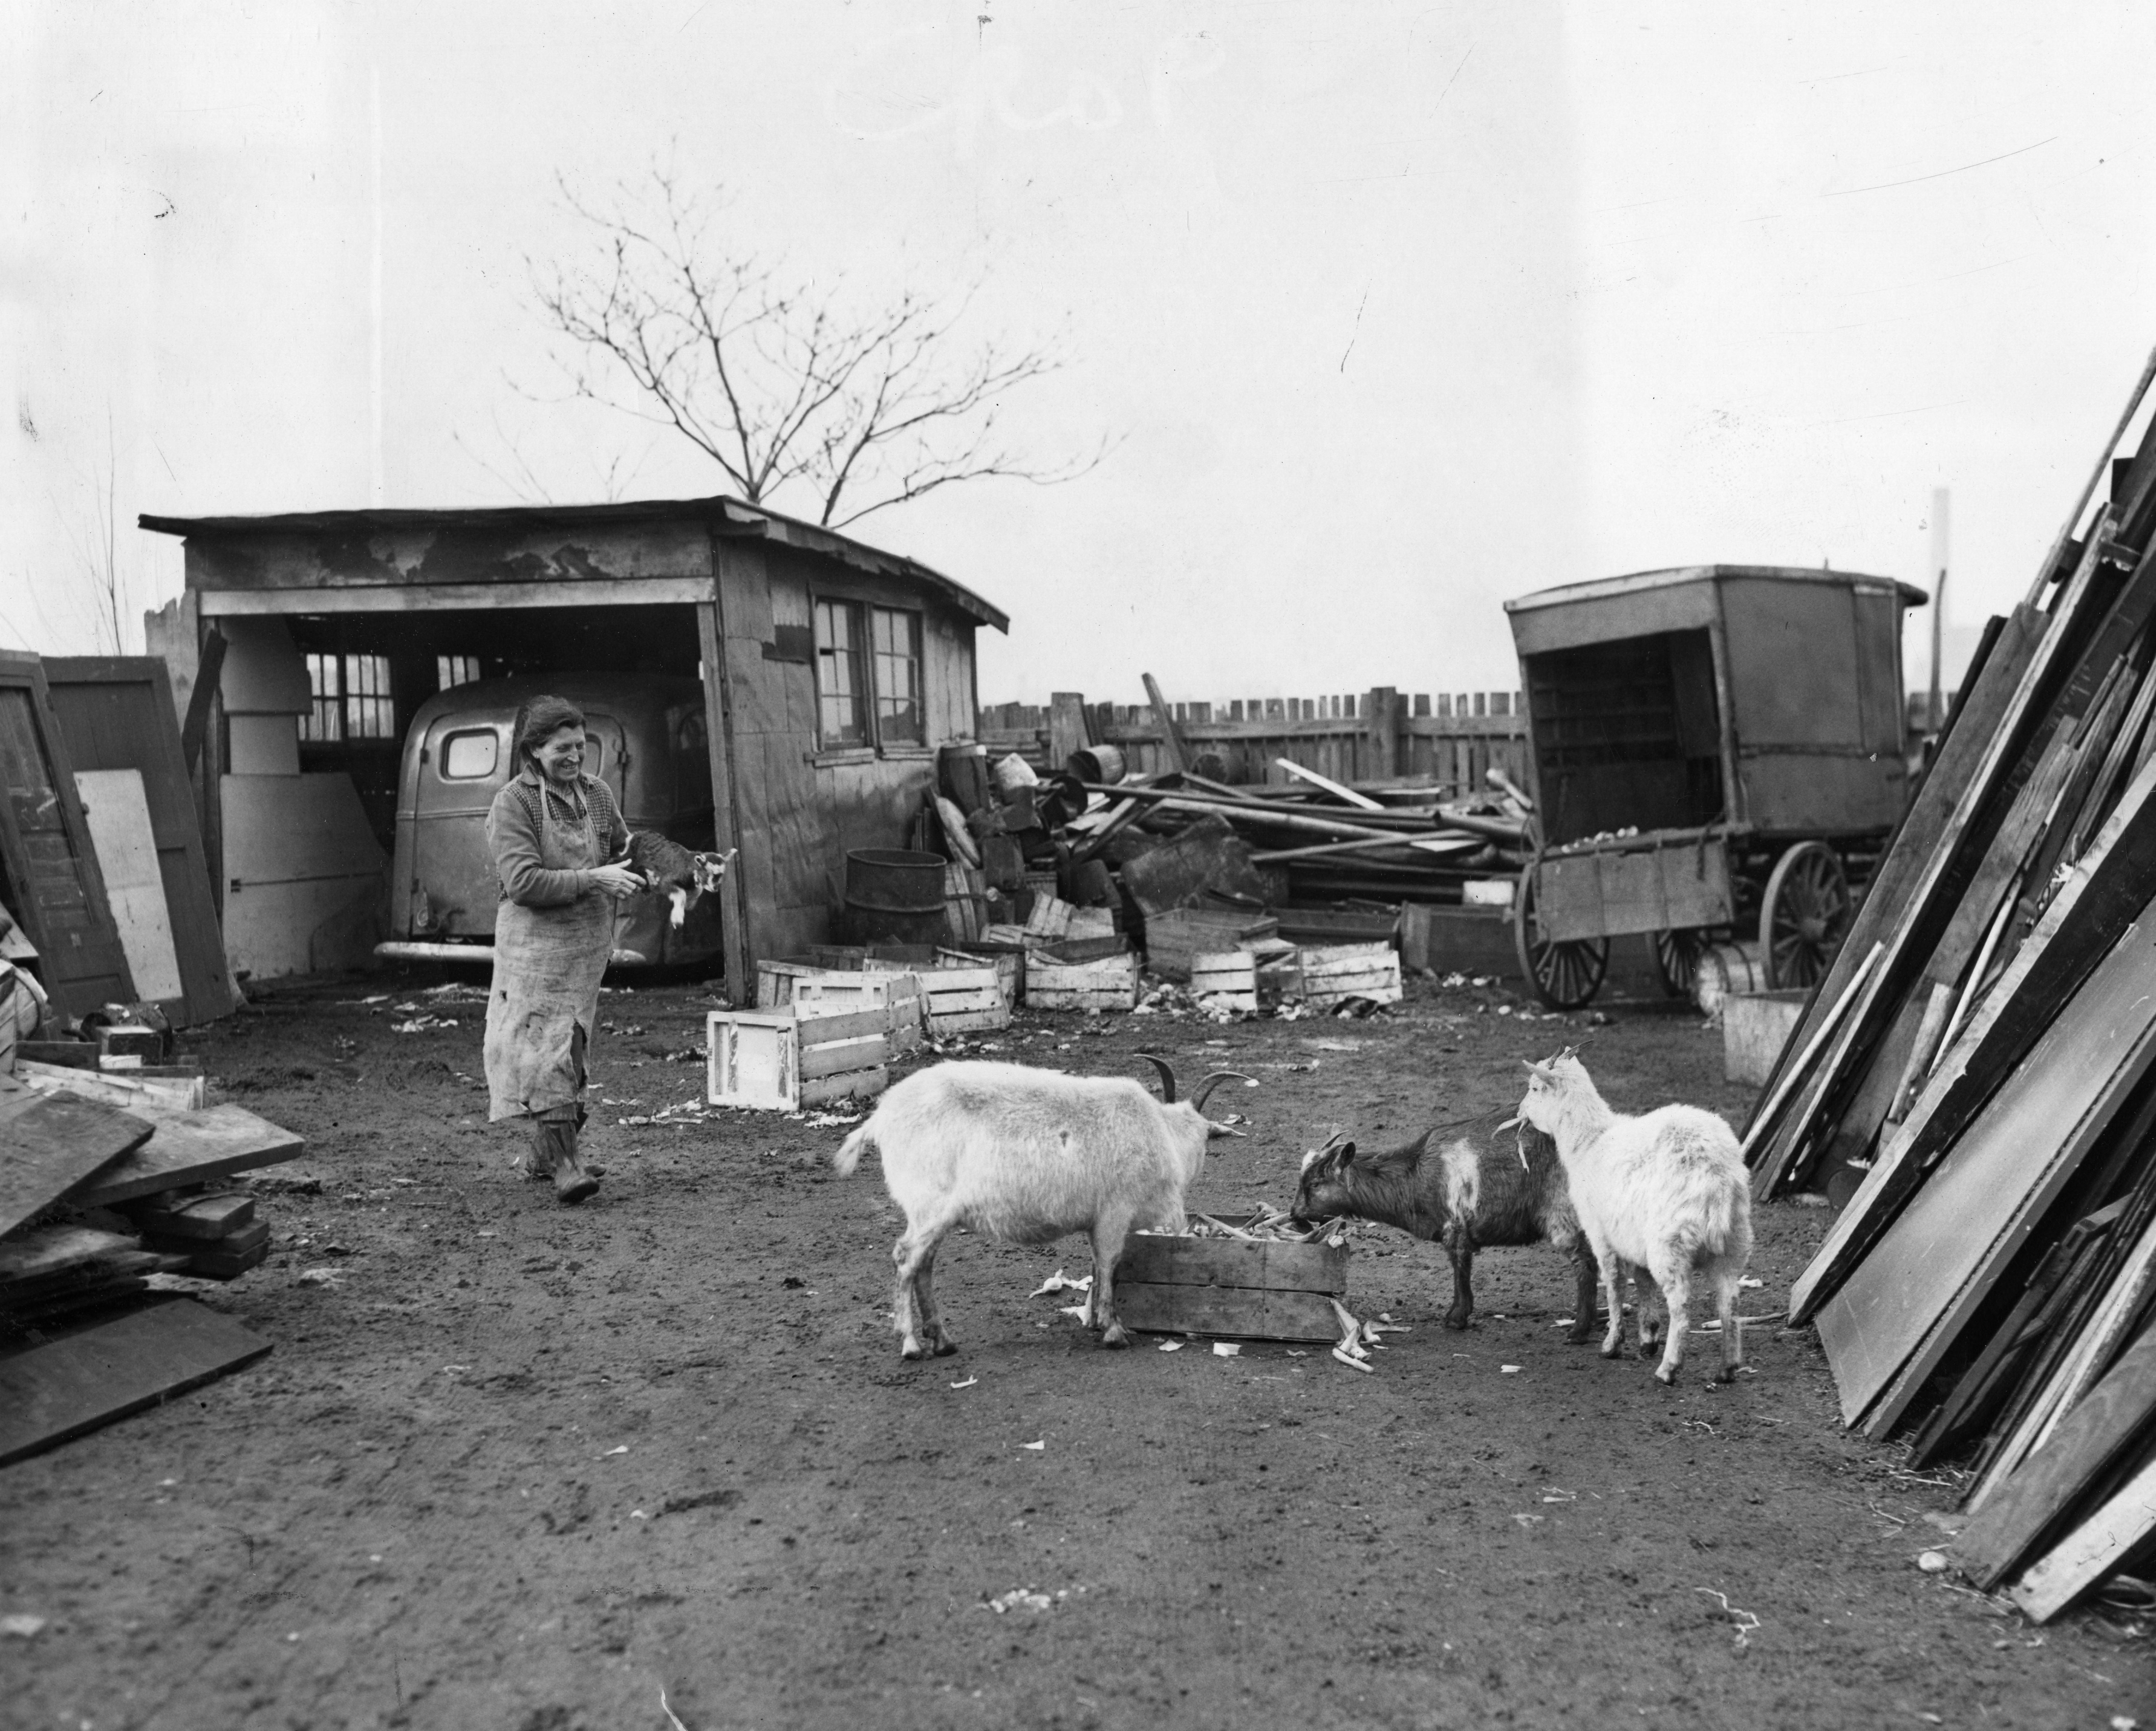 Goats on Stonehouse Lane, March 1953, Evening Bulletin | Special Collections Research Center, Temple University Libraries, Philadelphia, PA